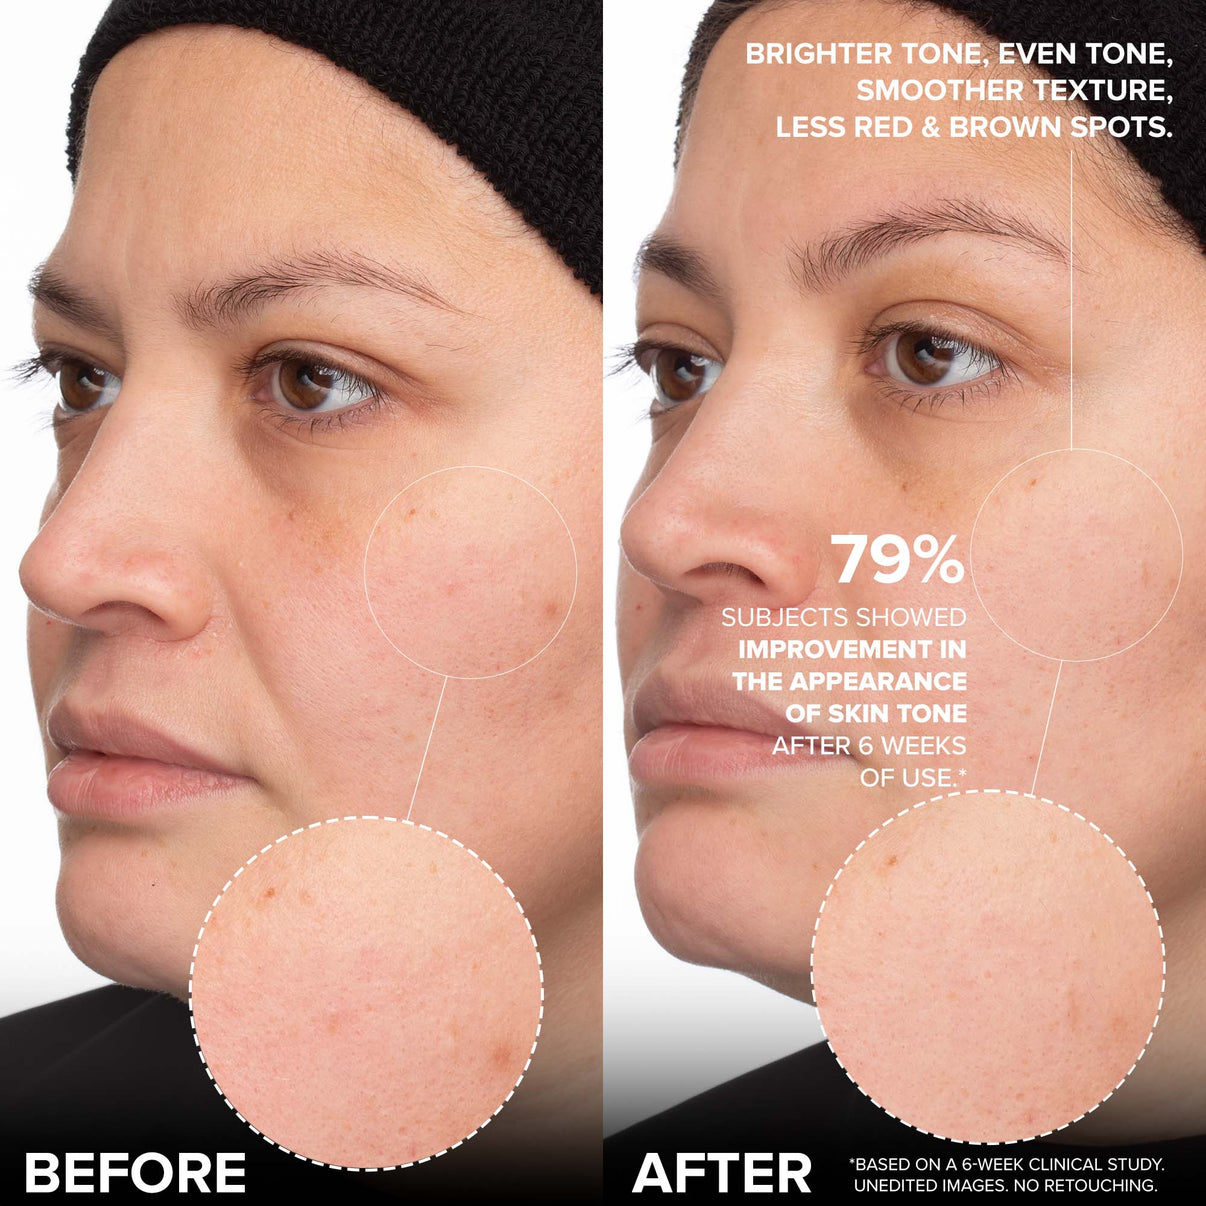 79% subjects showed improvement in the appearance of skin tone after 6 weeks of use